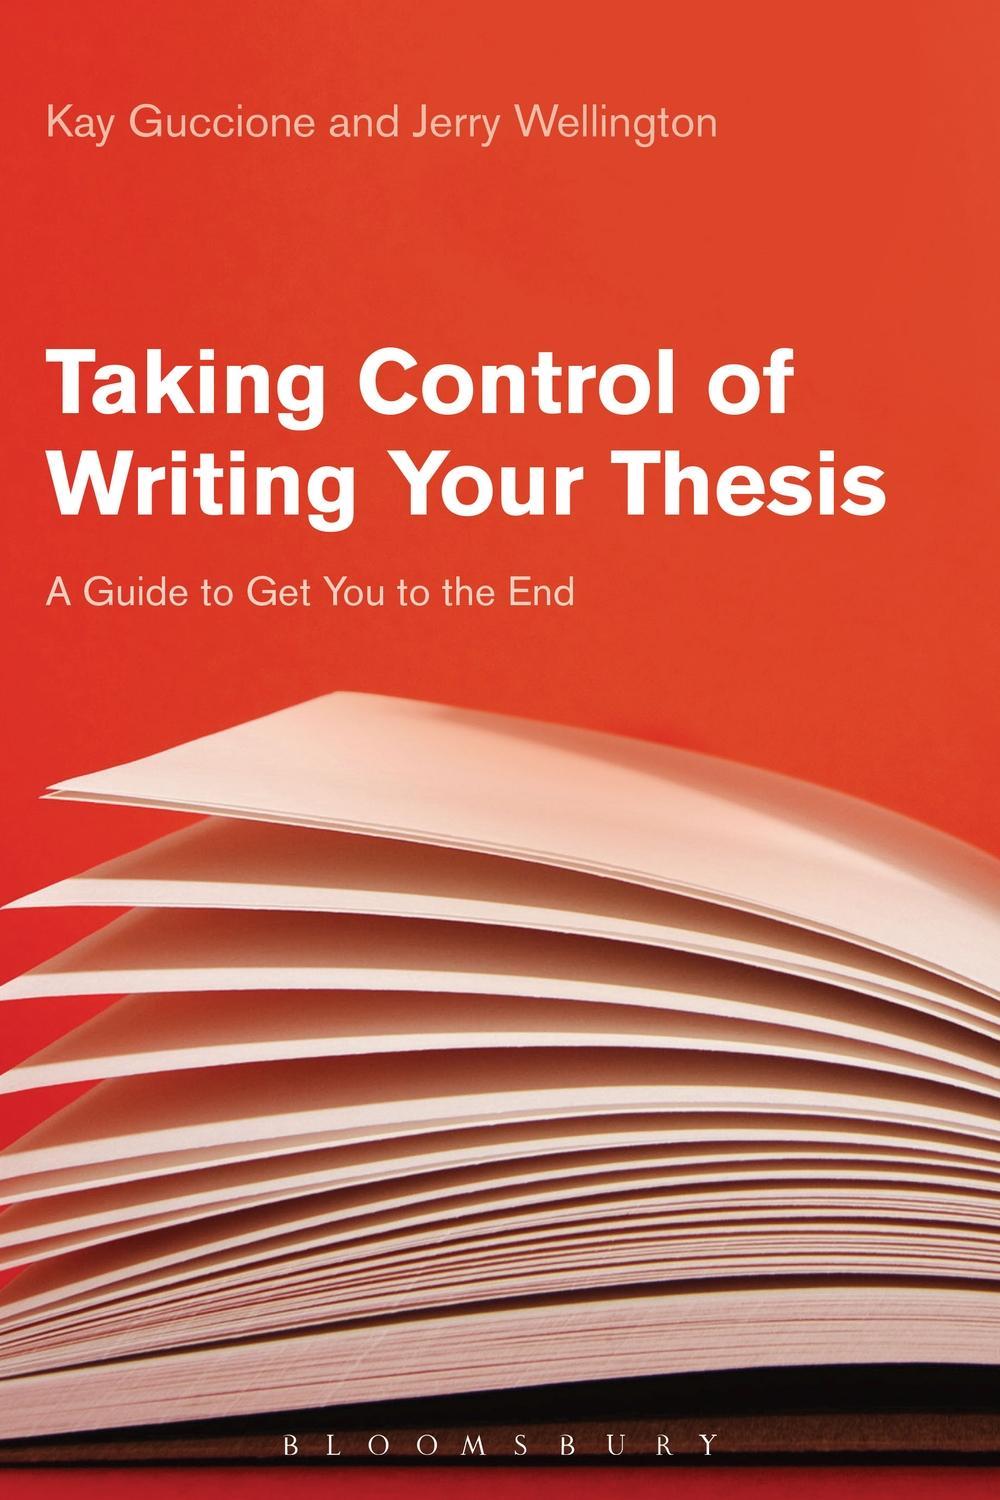 Taking Control of Writing Your Thesis - Kay Guccione